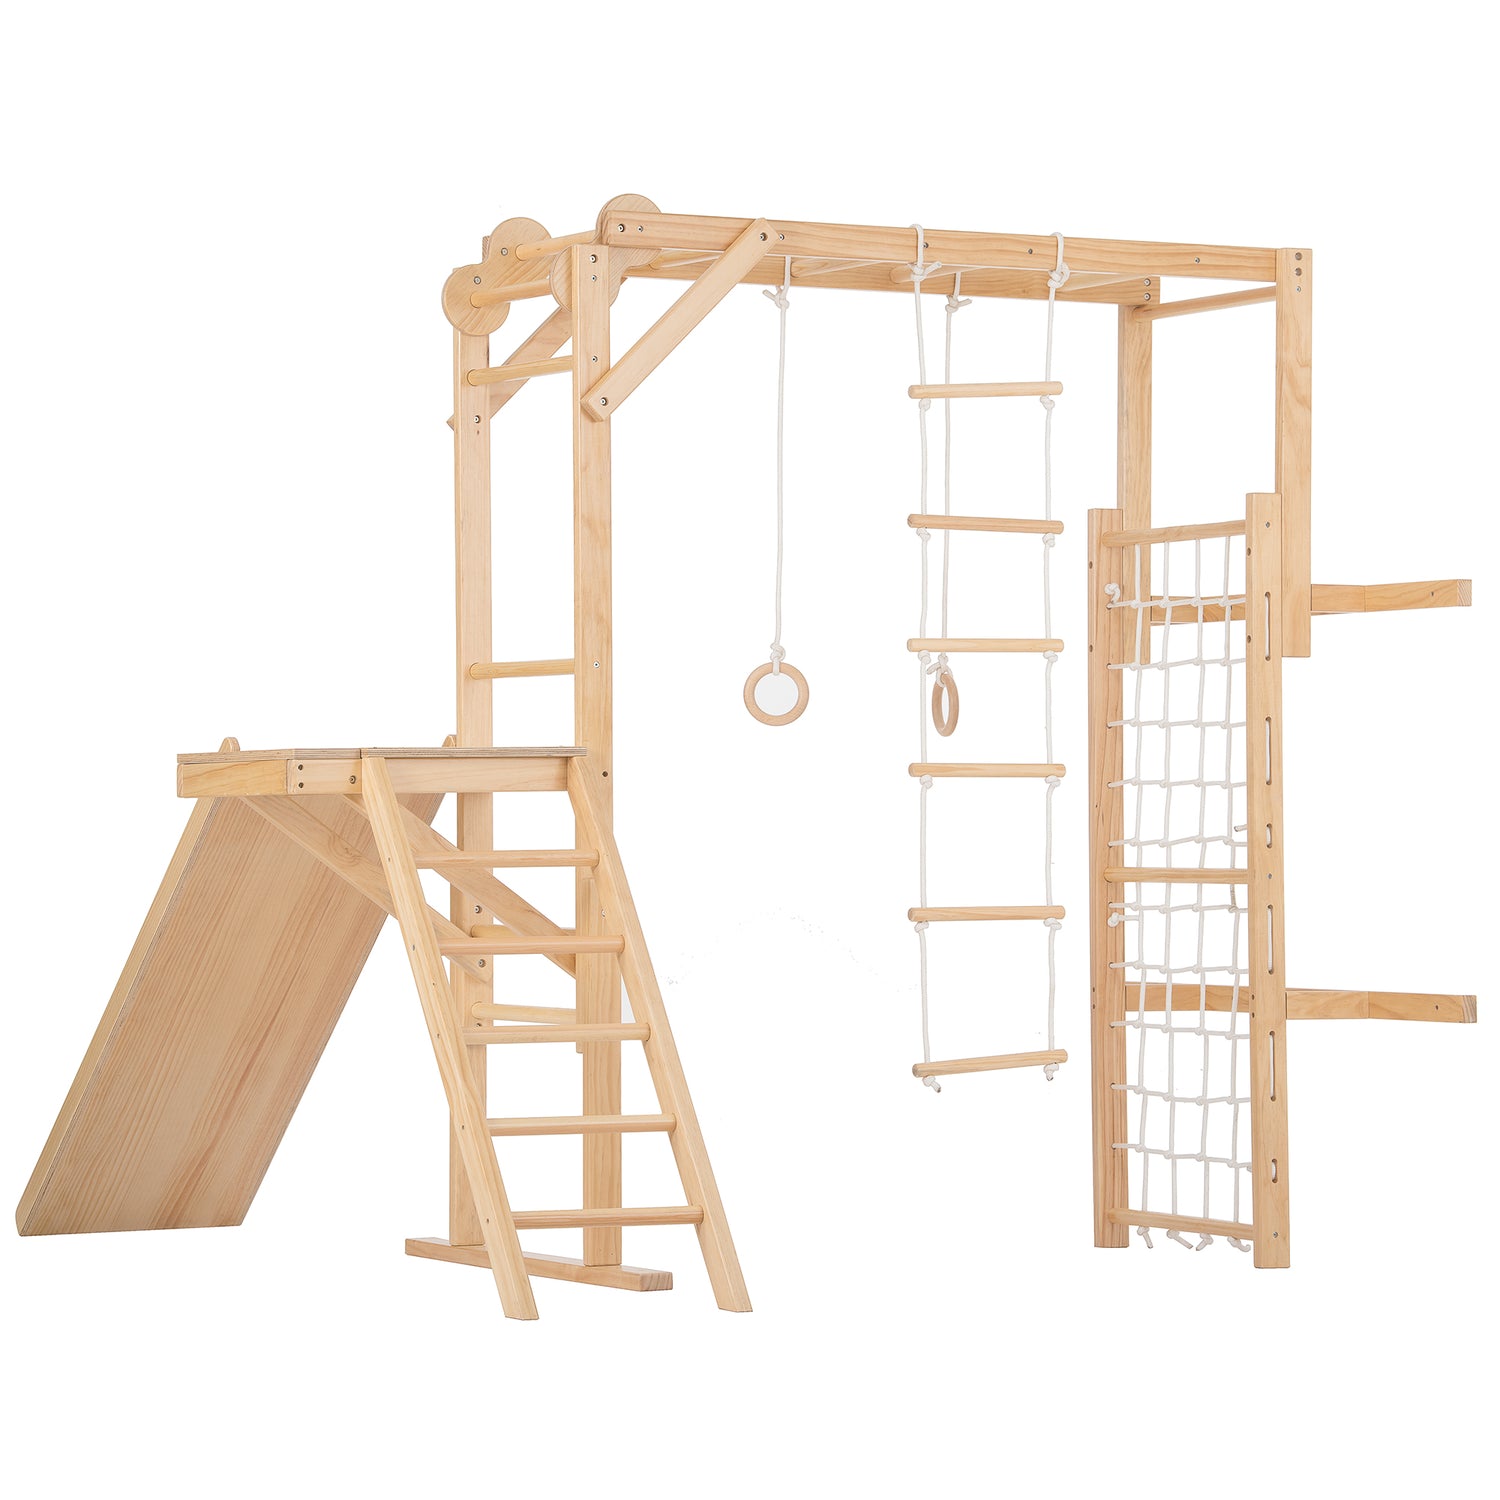 The Grove Jungle Gym - Avenlur's Premium 8 in 1 Wooden Playset for Older Kids in Natural Wood Color